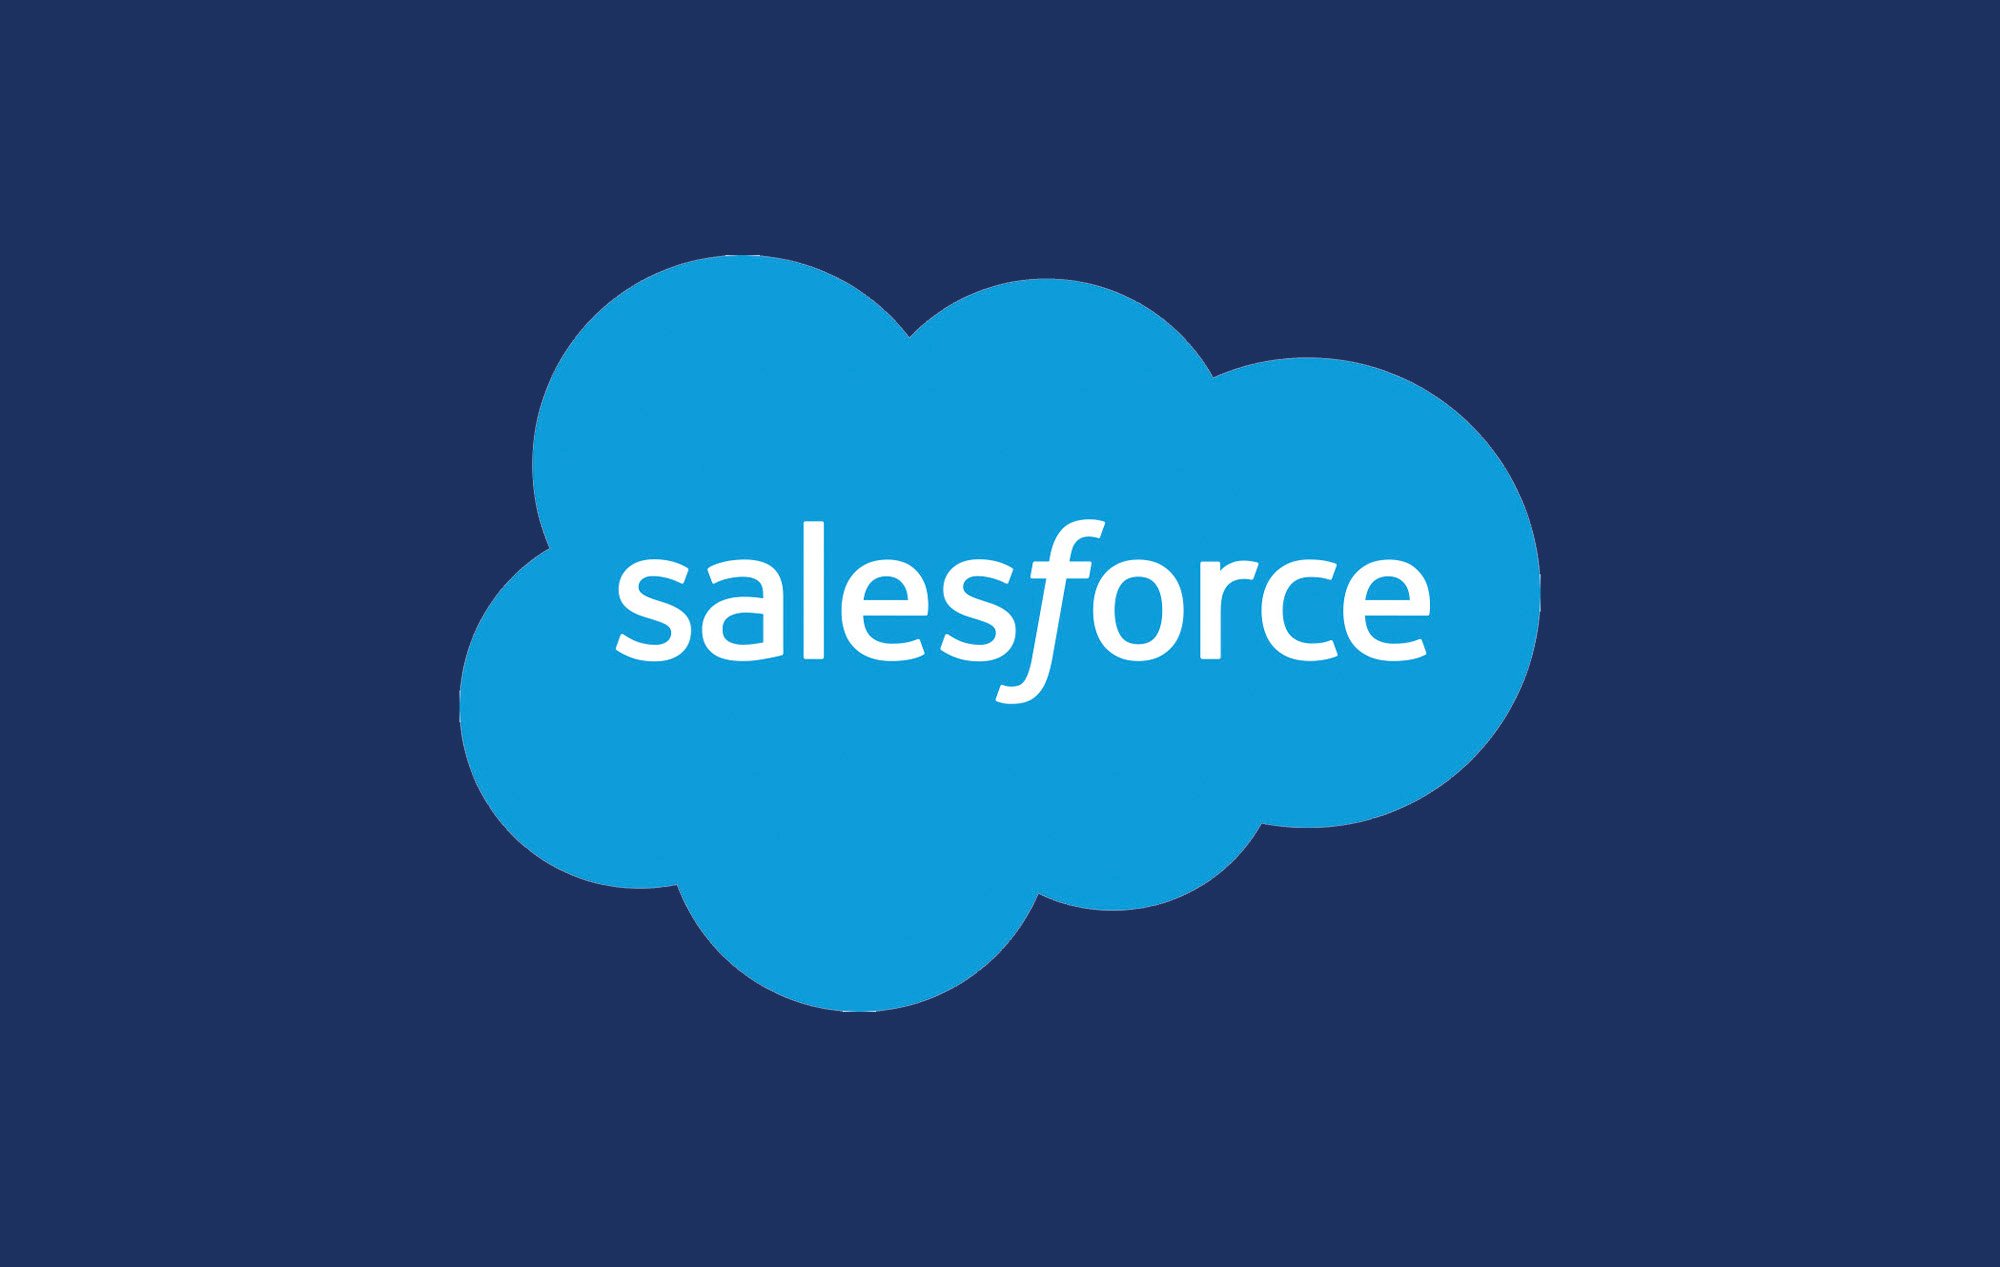 Salesforce Signs On as Founding Partner of InclusionHub, a